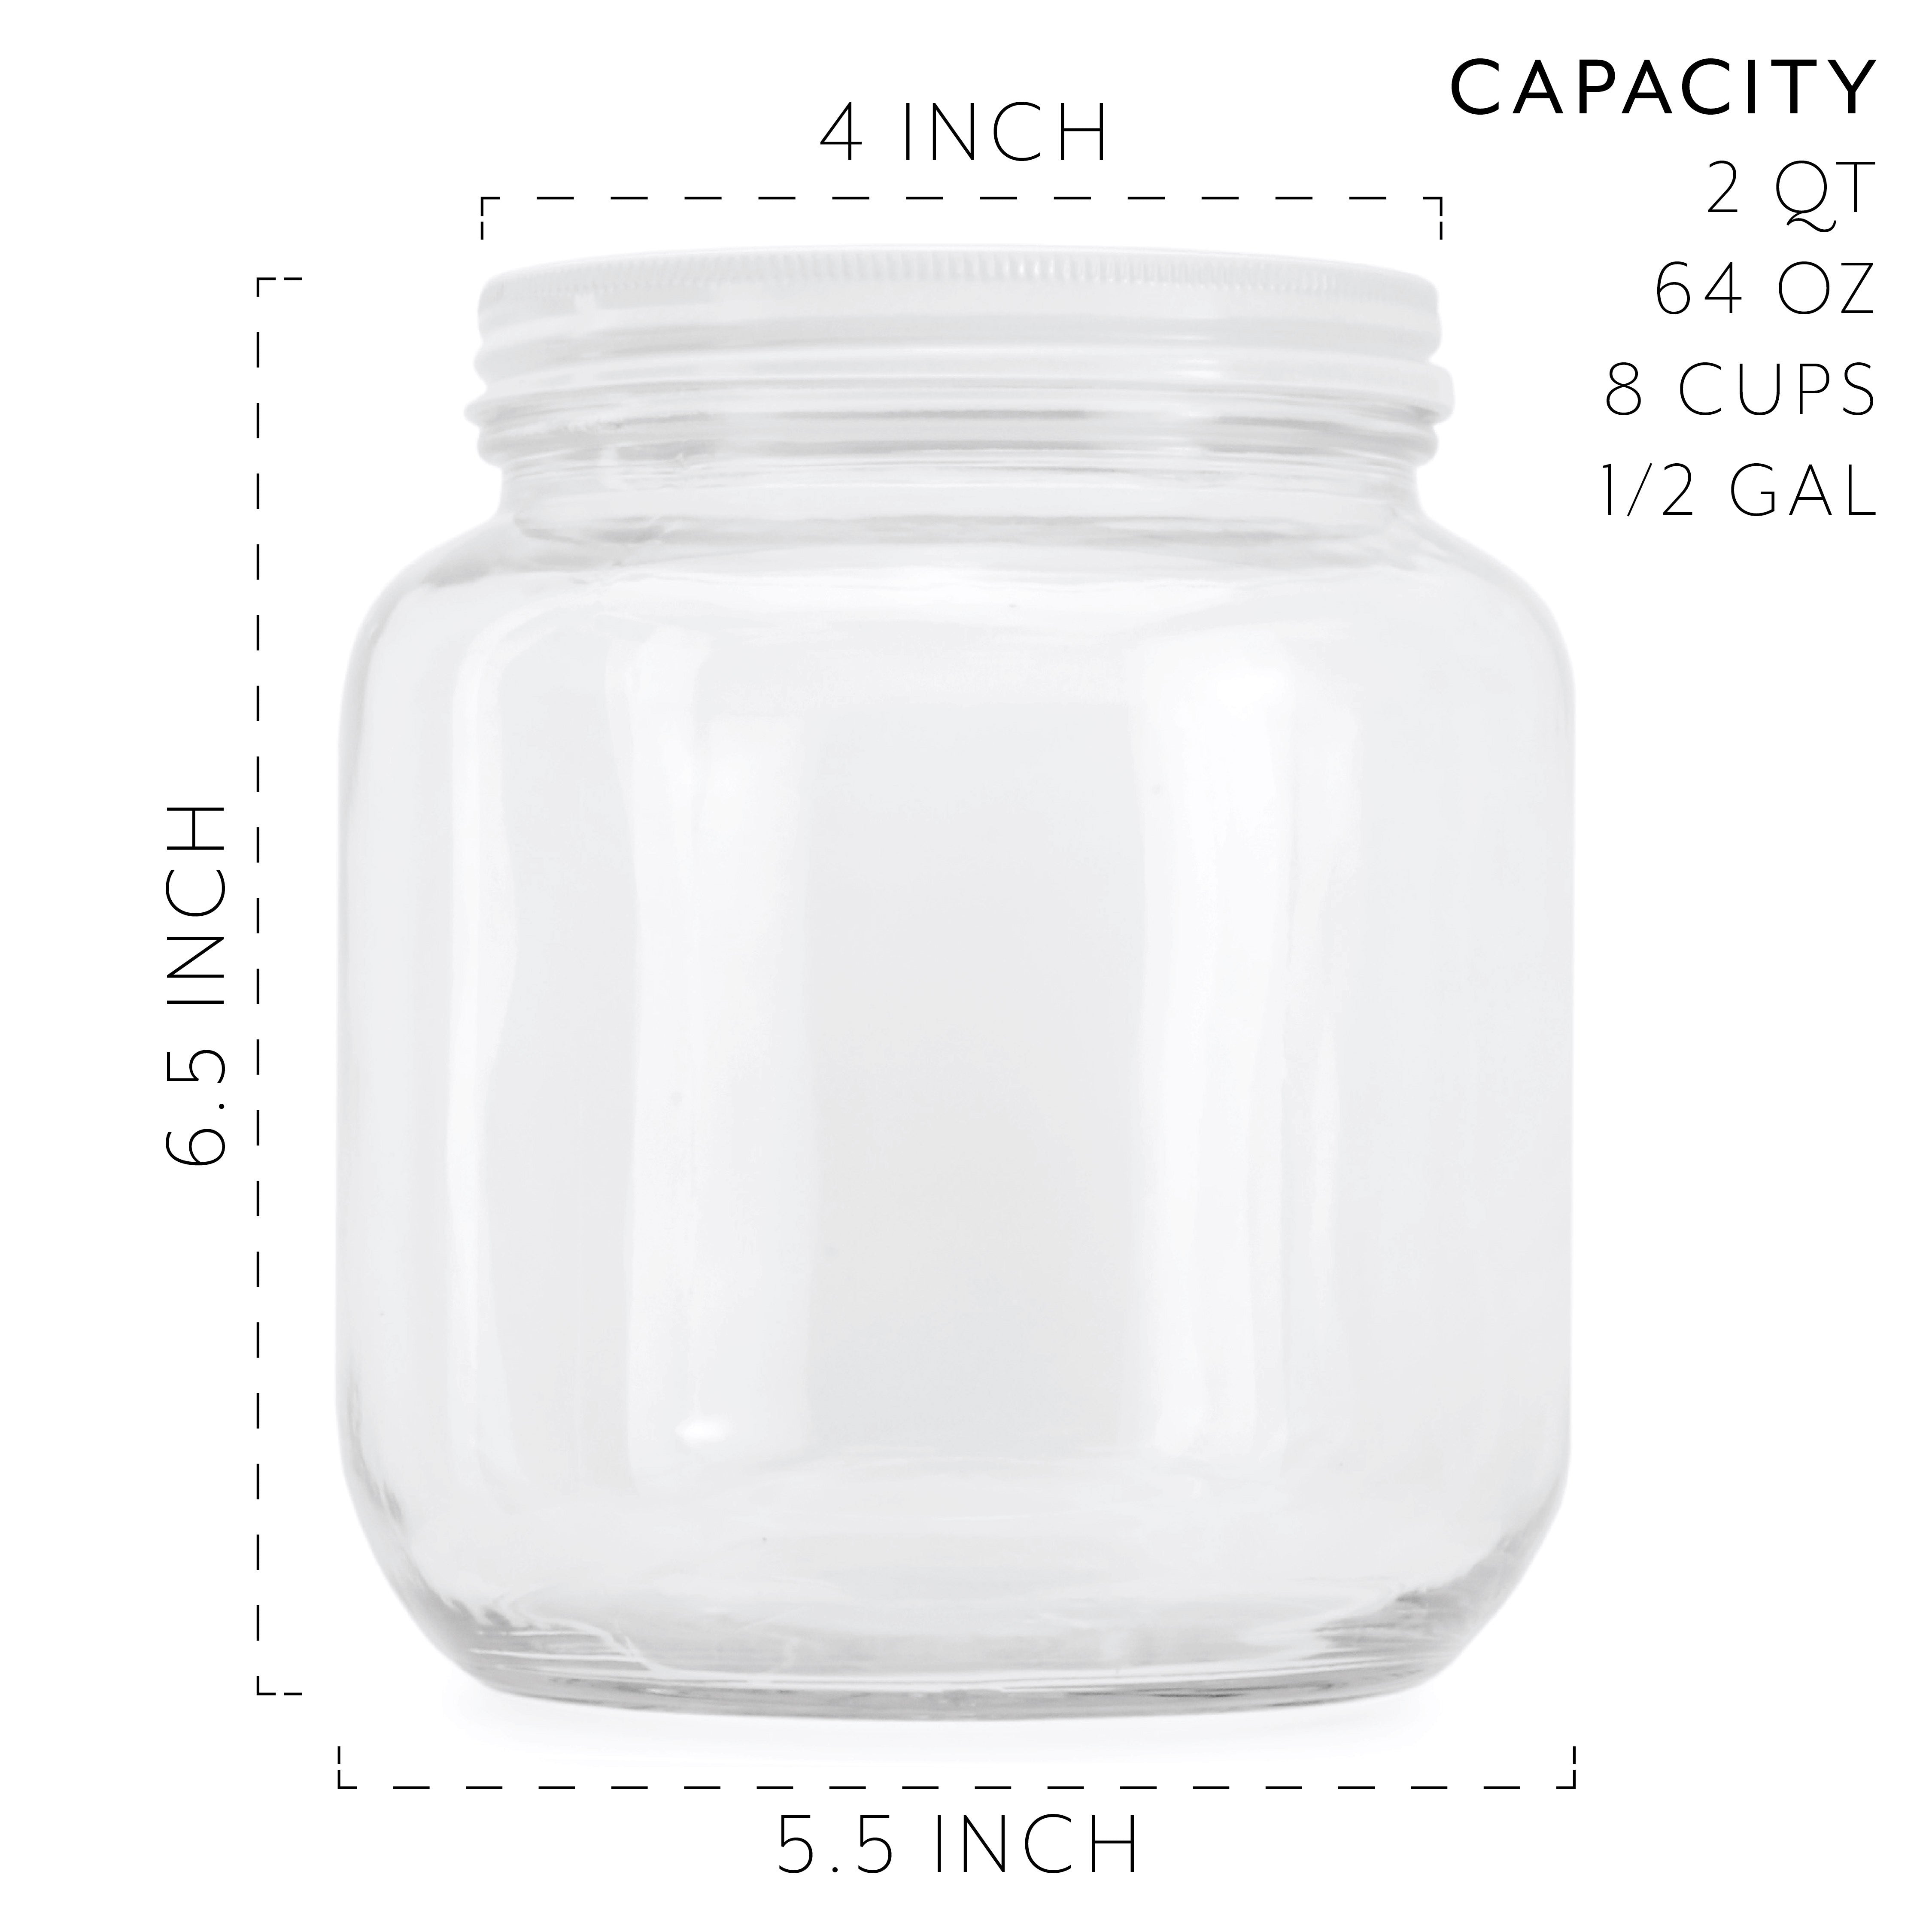 1 Gallon Wide Mouth Clear Jug